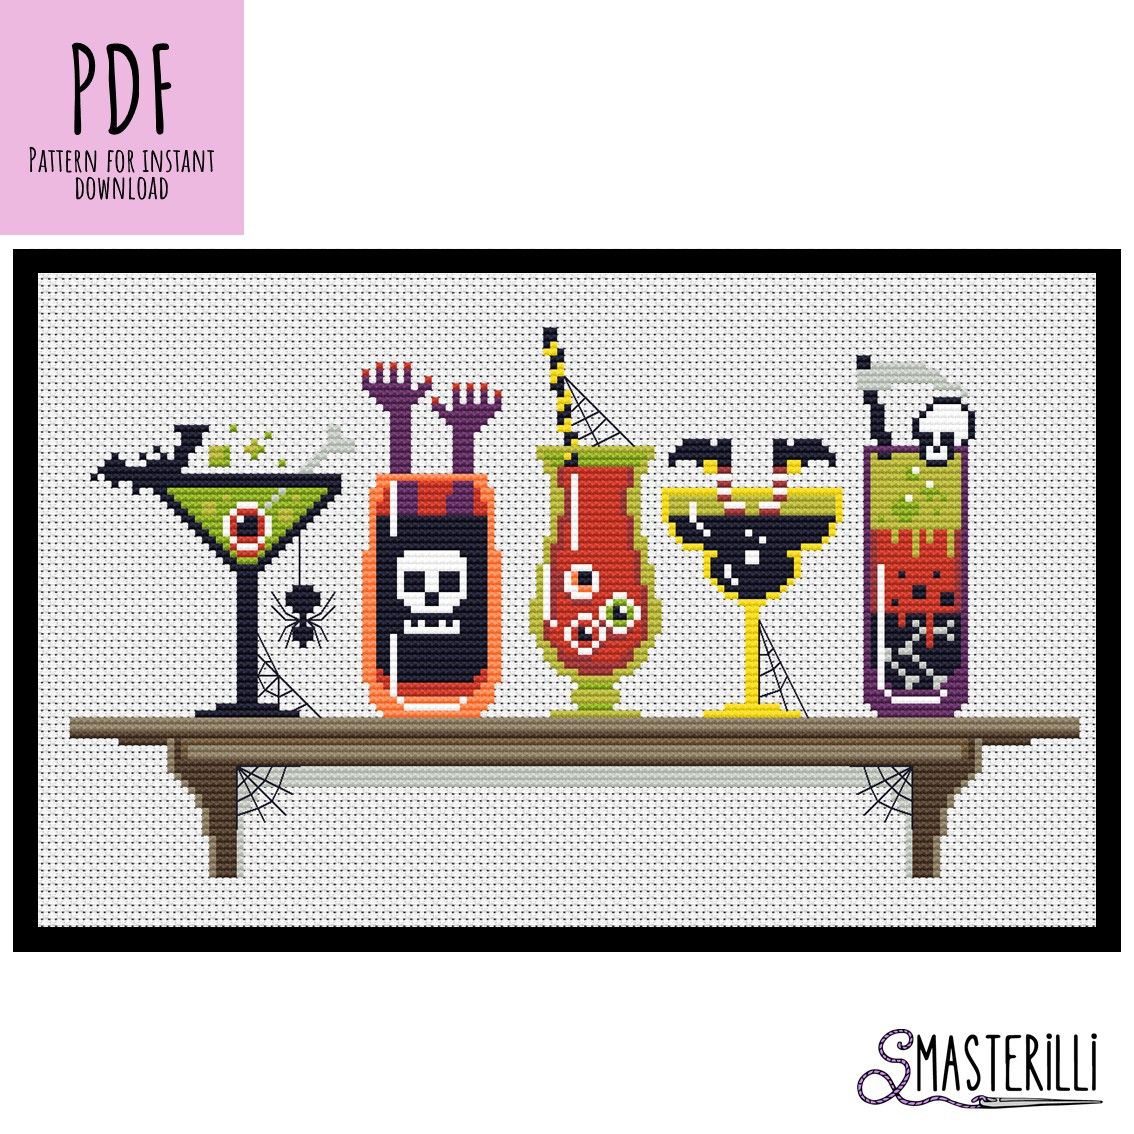 Halloween cross stitch pattern featuring creepy cocktails and drinks design.